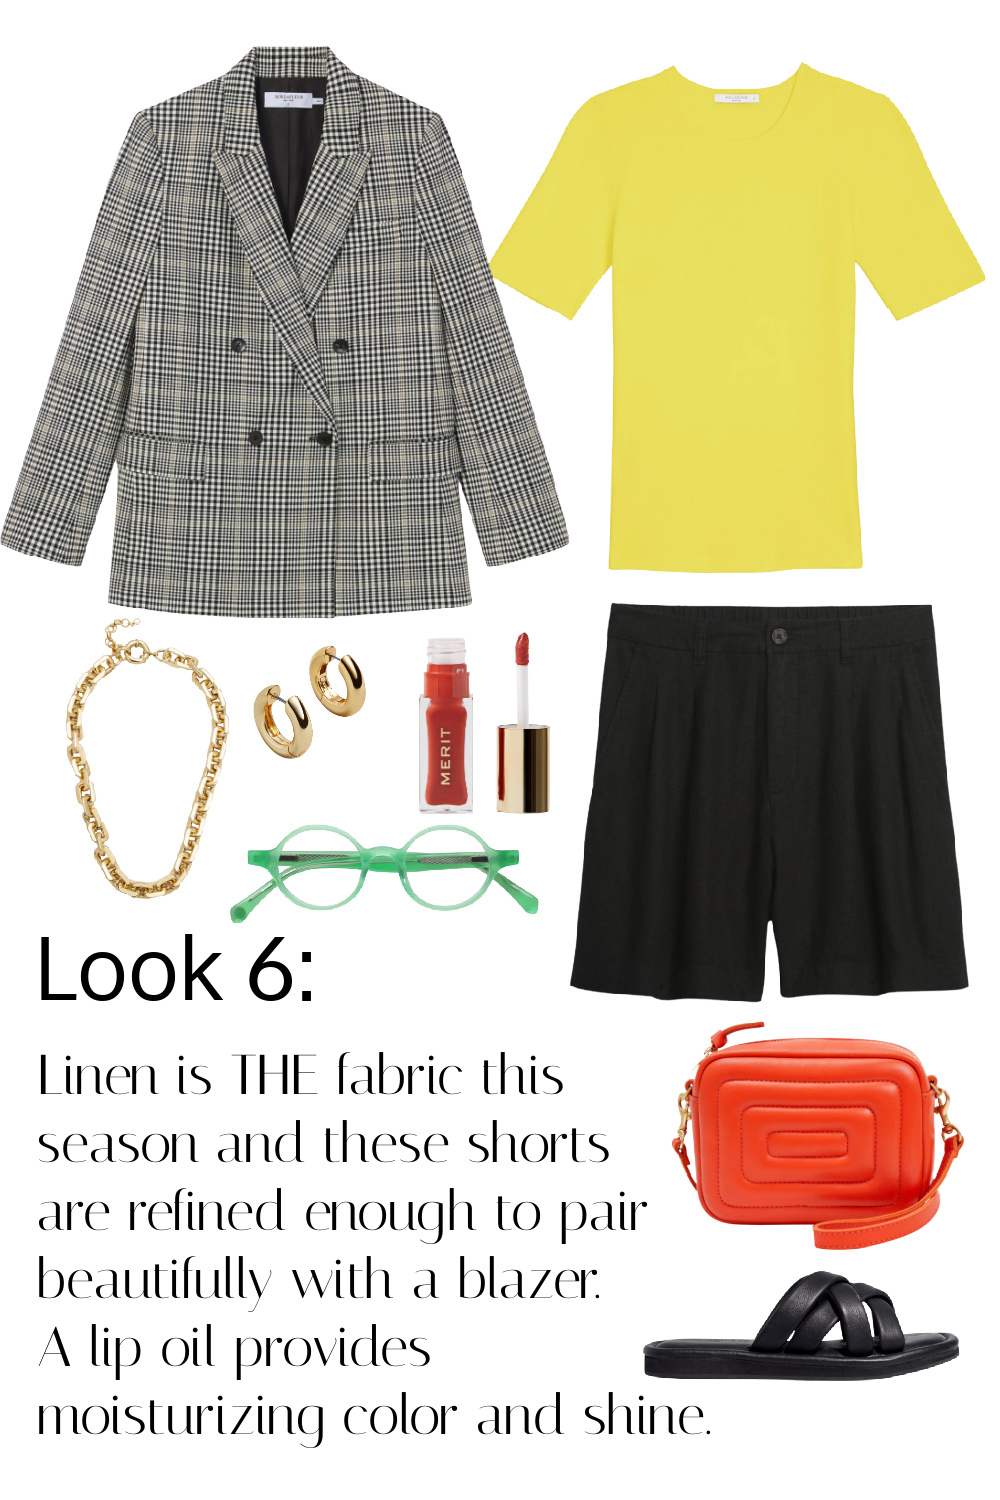 Look 6 styles the blazer with the chartreuse refined knit top and black linen shorts. Yes, a blazer can be casual! Push up the sleeves, pair with knits and a cap, but keep it refined with polished leather sandals and crossbody.